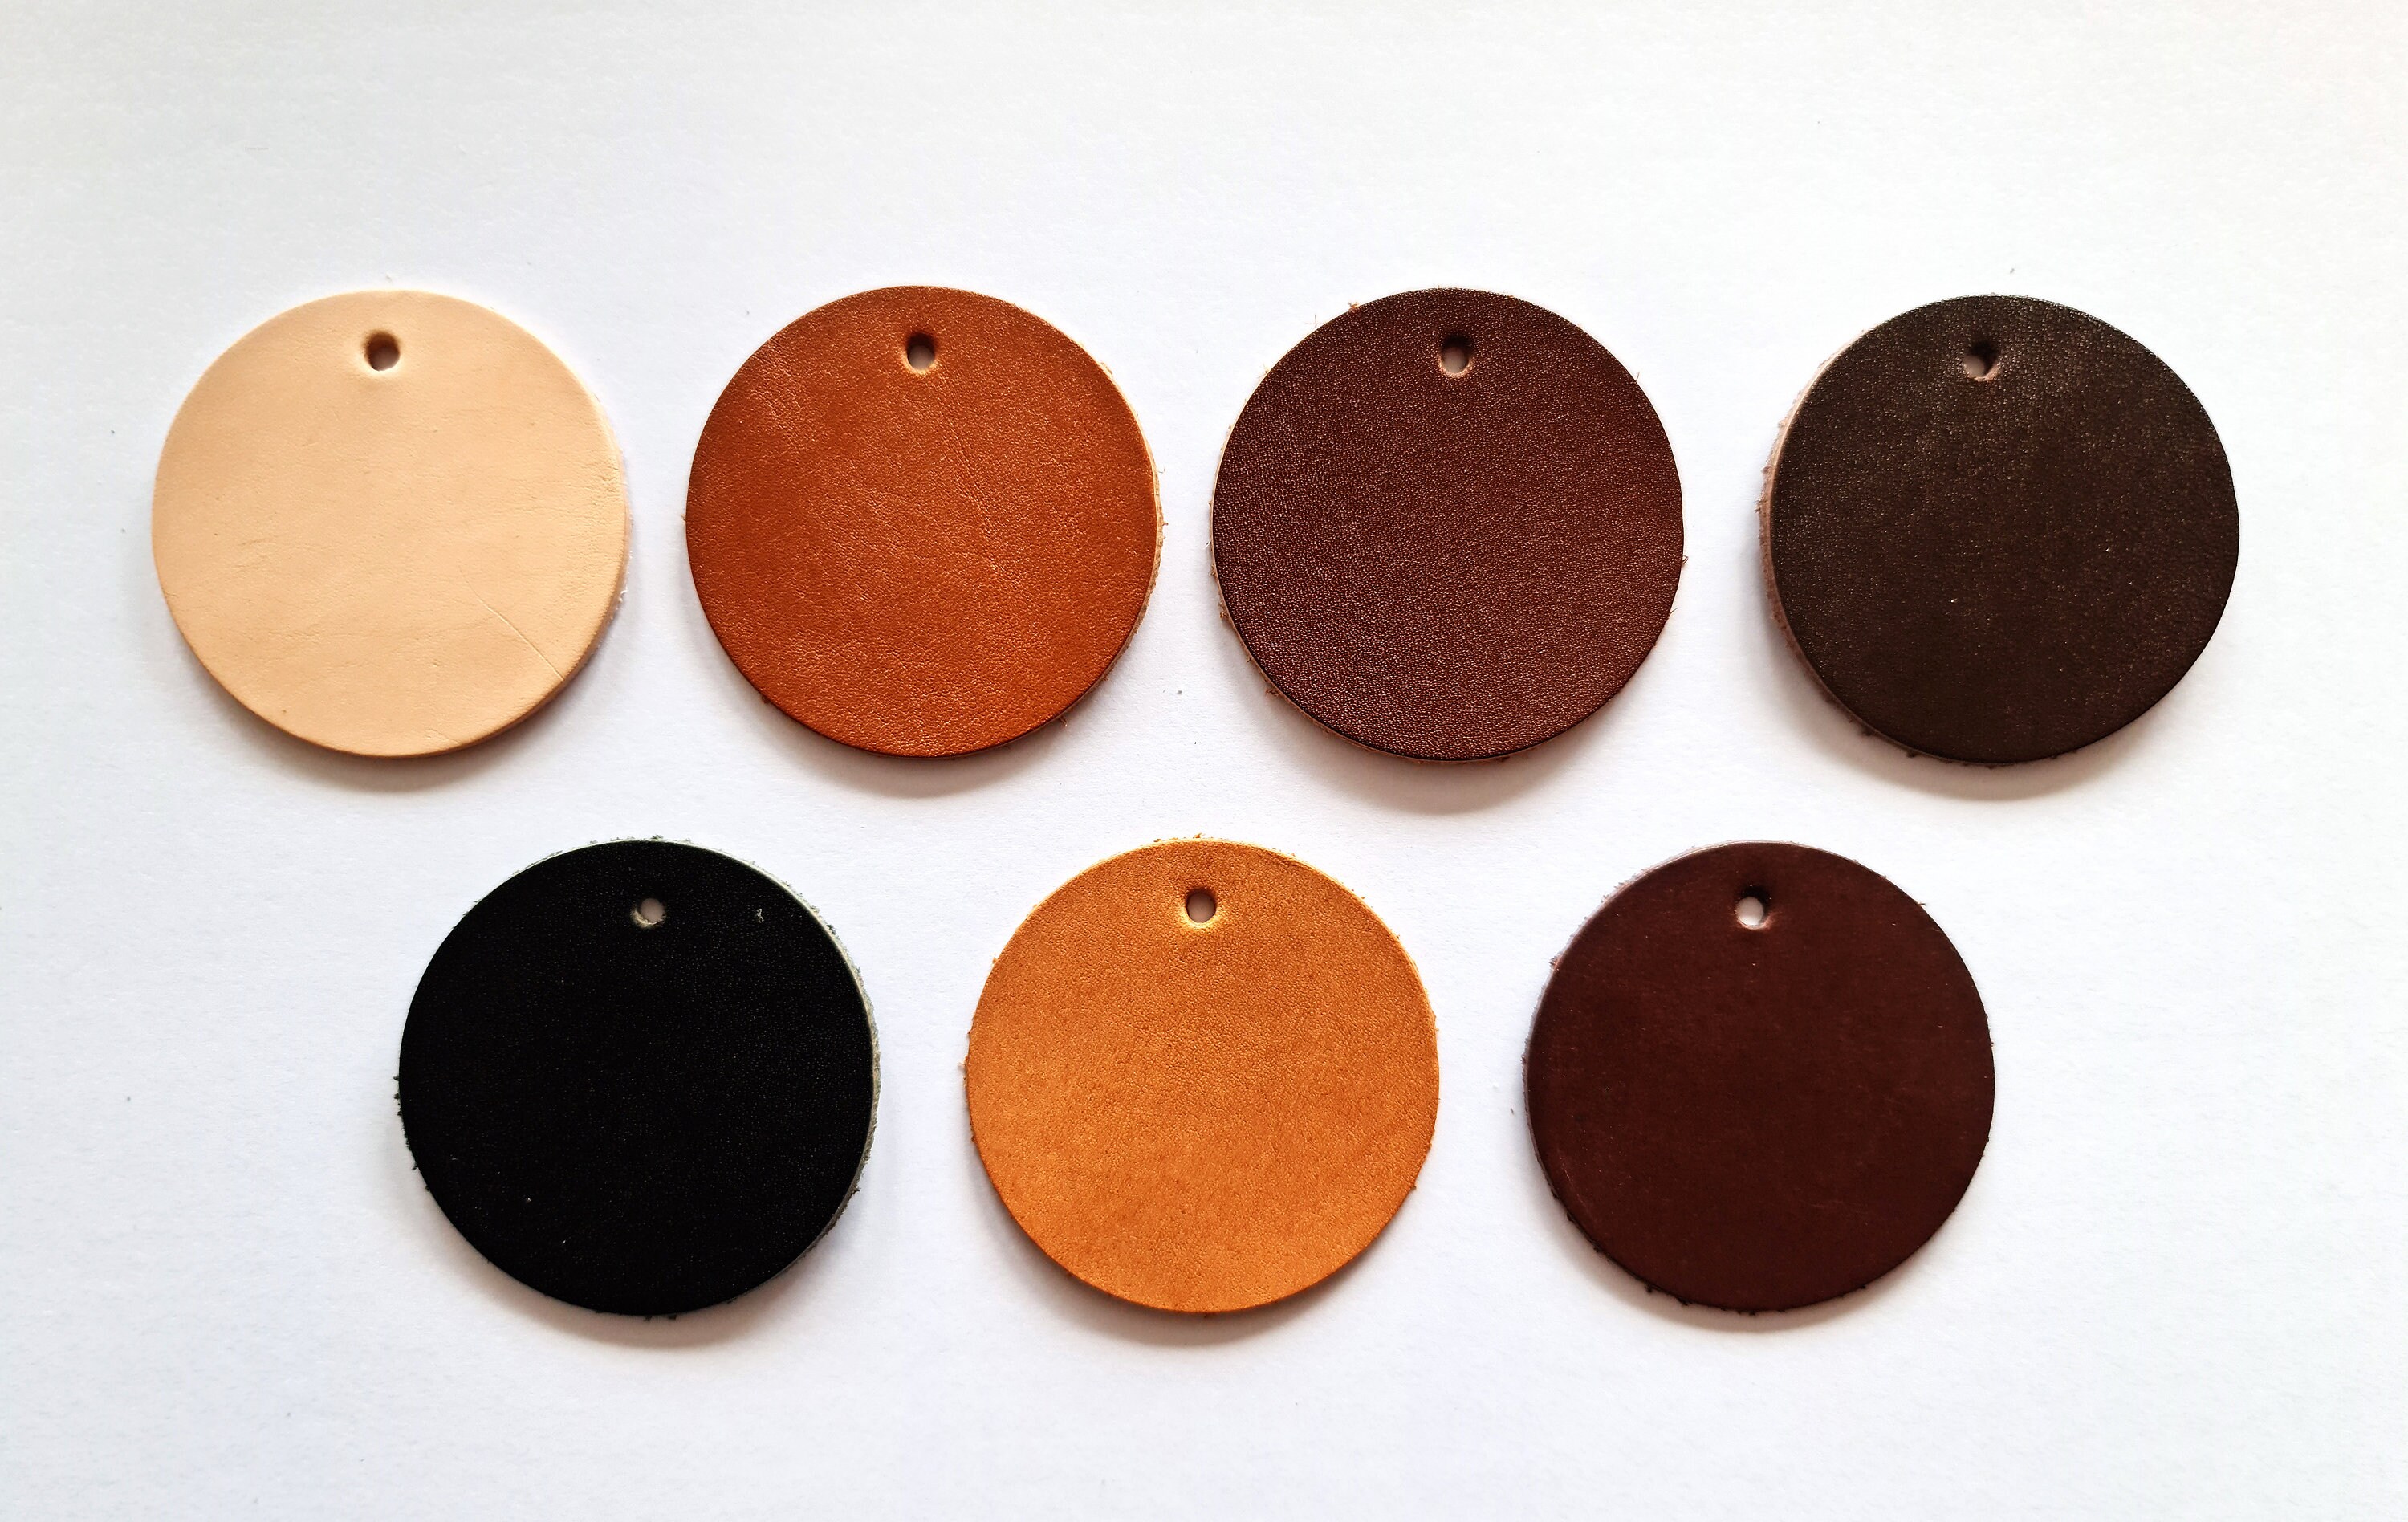 Handmade with Love Leather tag with Holes - Teddy Bear - Mod. RX02 -  Leather Handmade Labels for Hand Made Crafts, Veg Tanned Leather Tags  (Standard